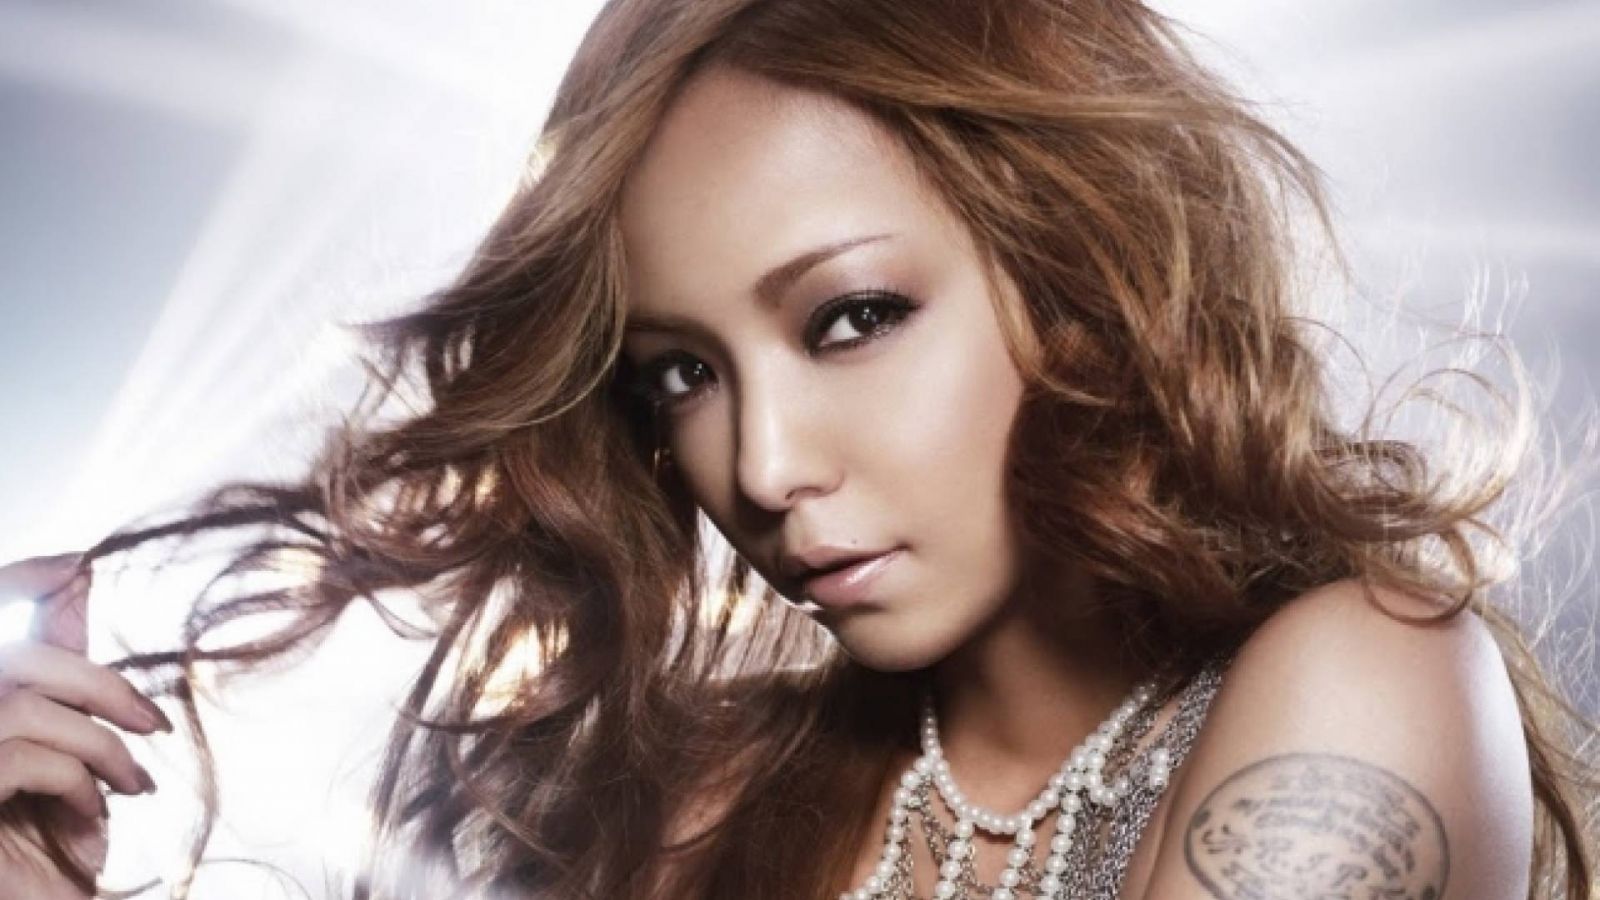 Collaboration Best-of from Amuro Namie © Avex Entertainment Inc.